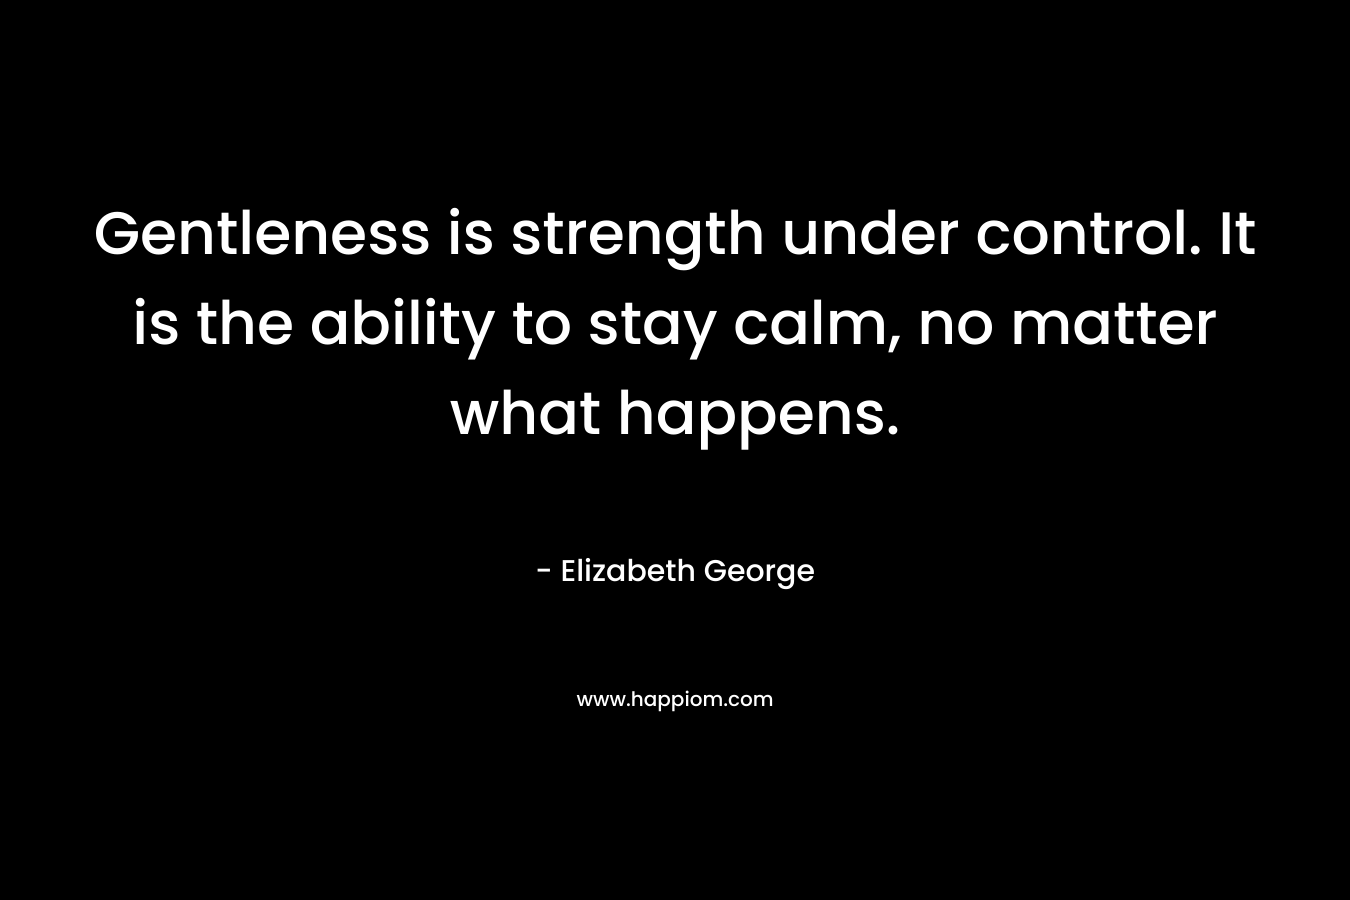 Gentleness is strength under control. It is the ability to stay calm, no matter what happens. – Elizabeth George